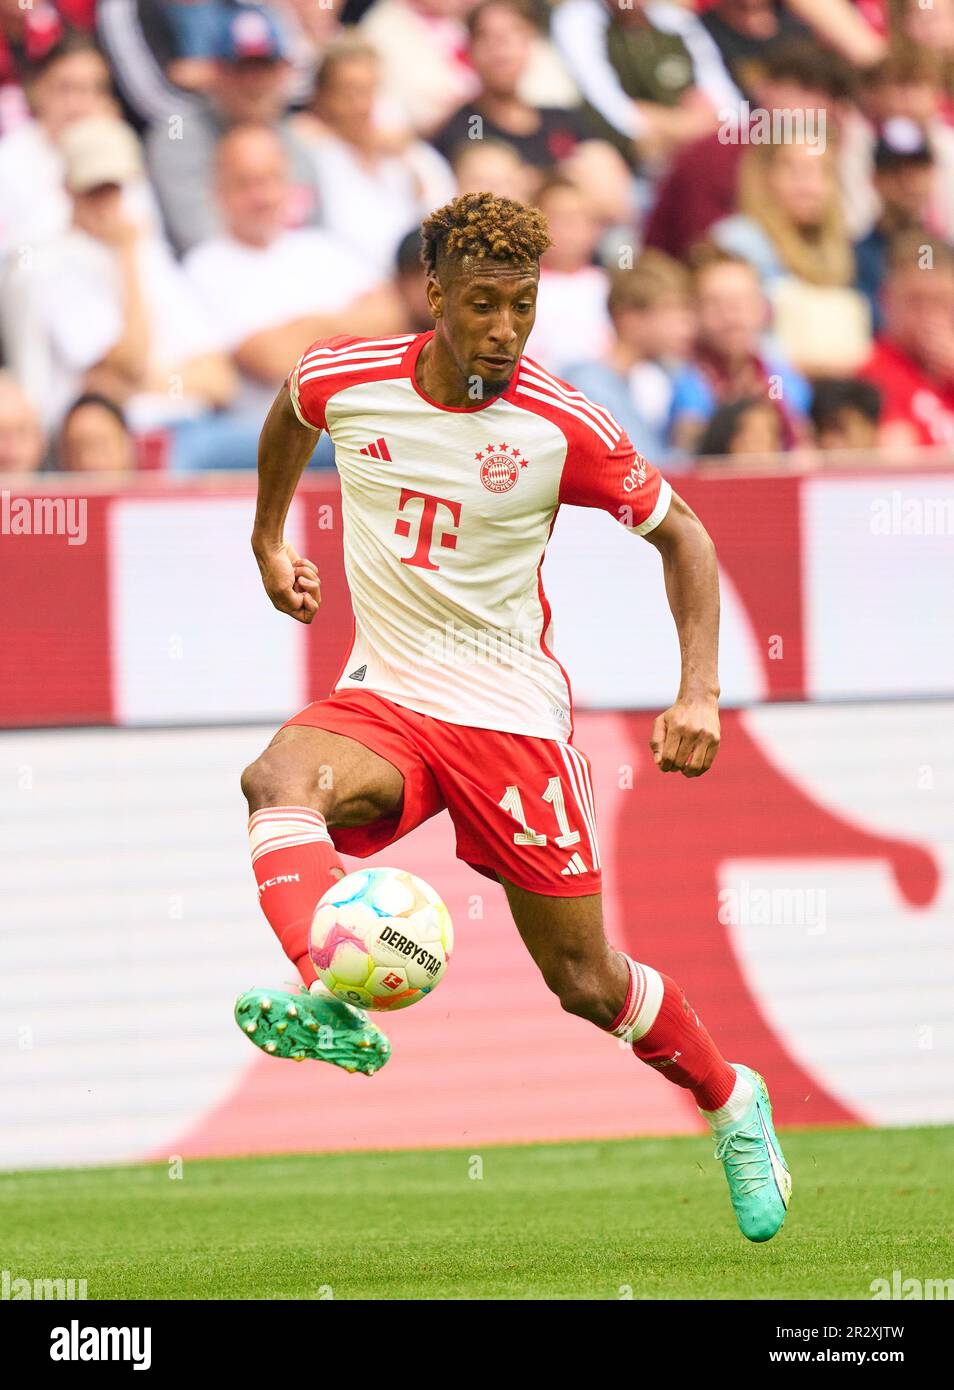 Kingsley Coman, FCB 11   in the match FC BAYERN MUENCHEN - RB LEIPZIG 1-3 1.German Football League on May 20, 2023 in Munich, Germany. Season 2022/2023, matchday 33, 1.Bundesliga, FCB, München, 33.Spieltag. © Peter Schatz / Alamy Live News    - DFL REGULATIONS PROHIBIT ANY USE OF PHOTOGRAPHS as IMAGE SEQUENCES and/or QUASI-VIDEO - Stock Photo